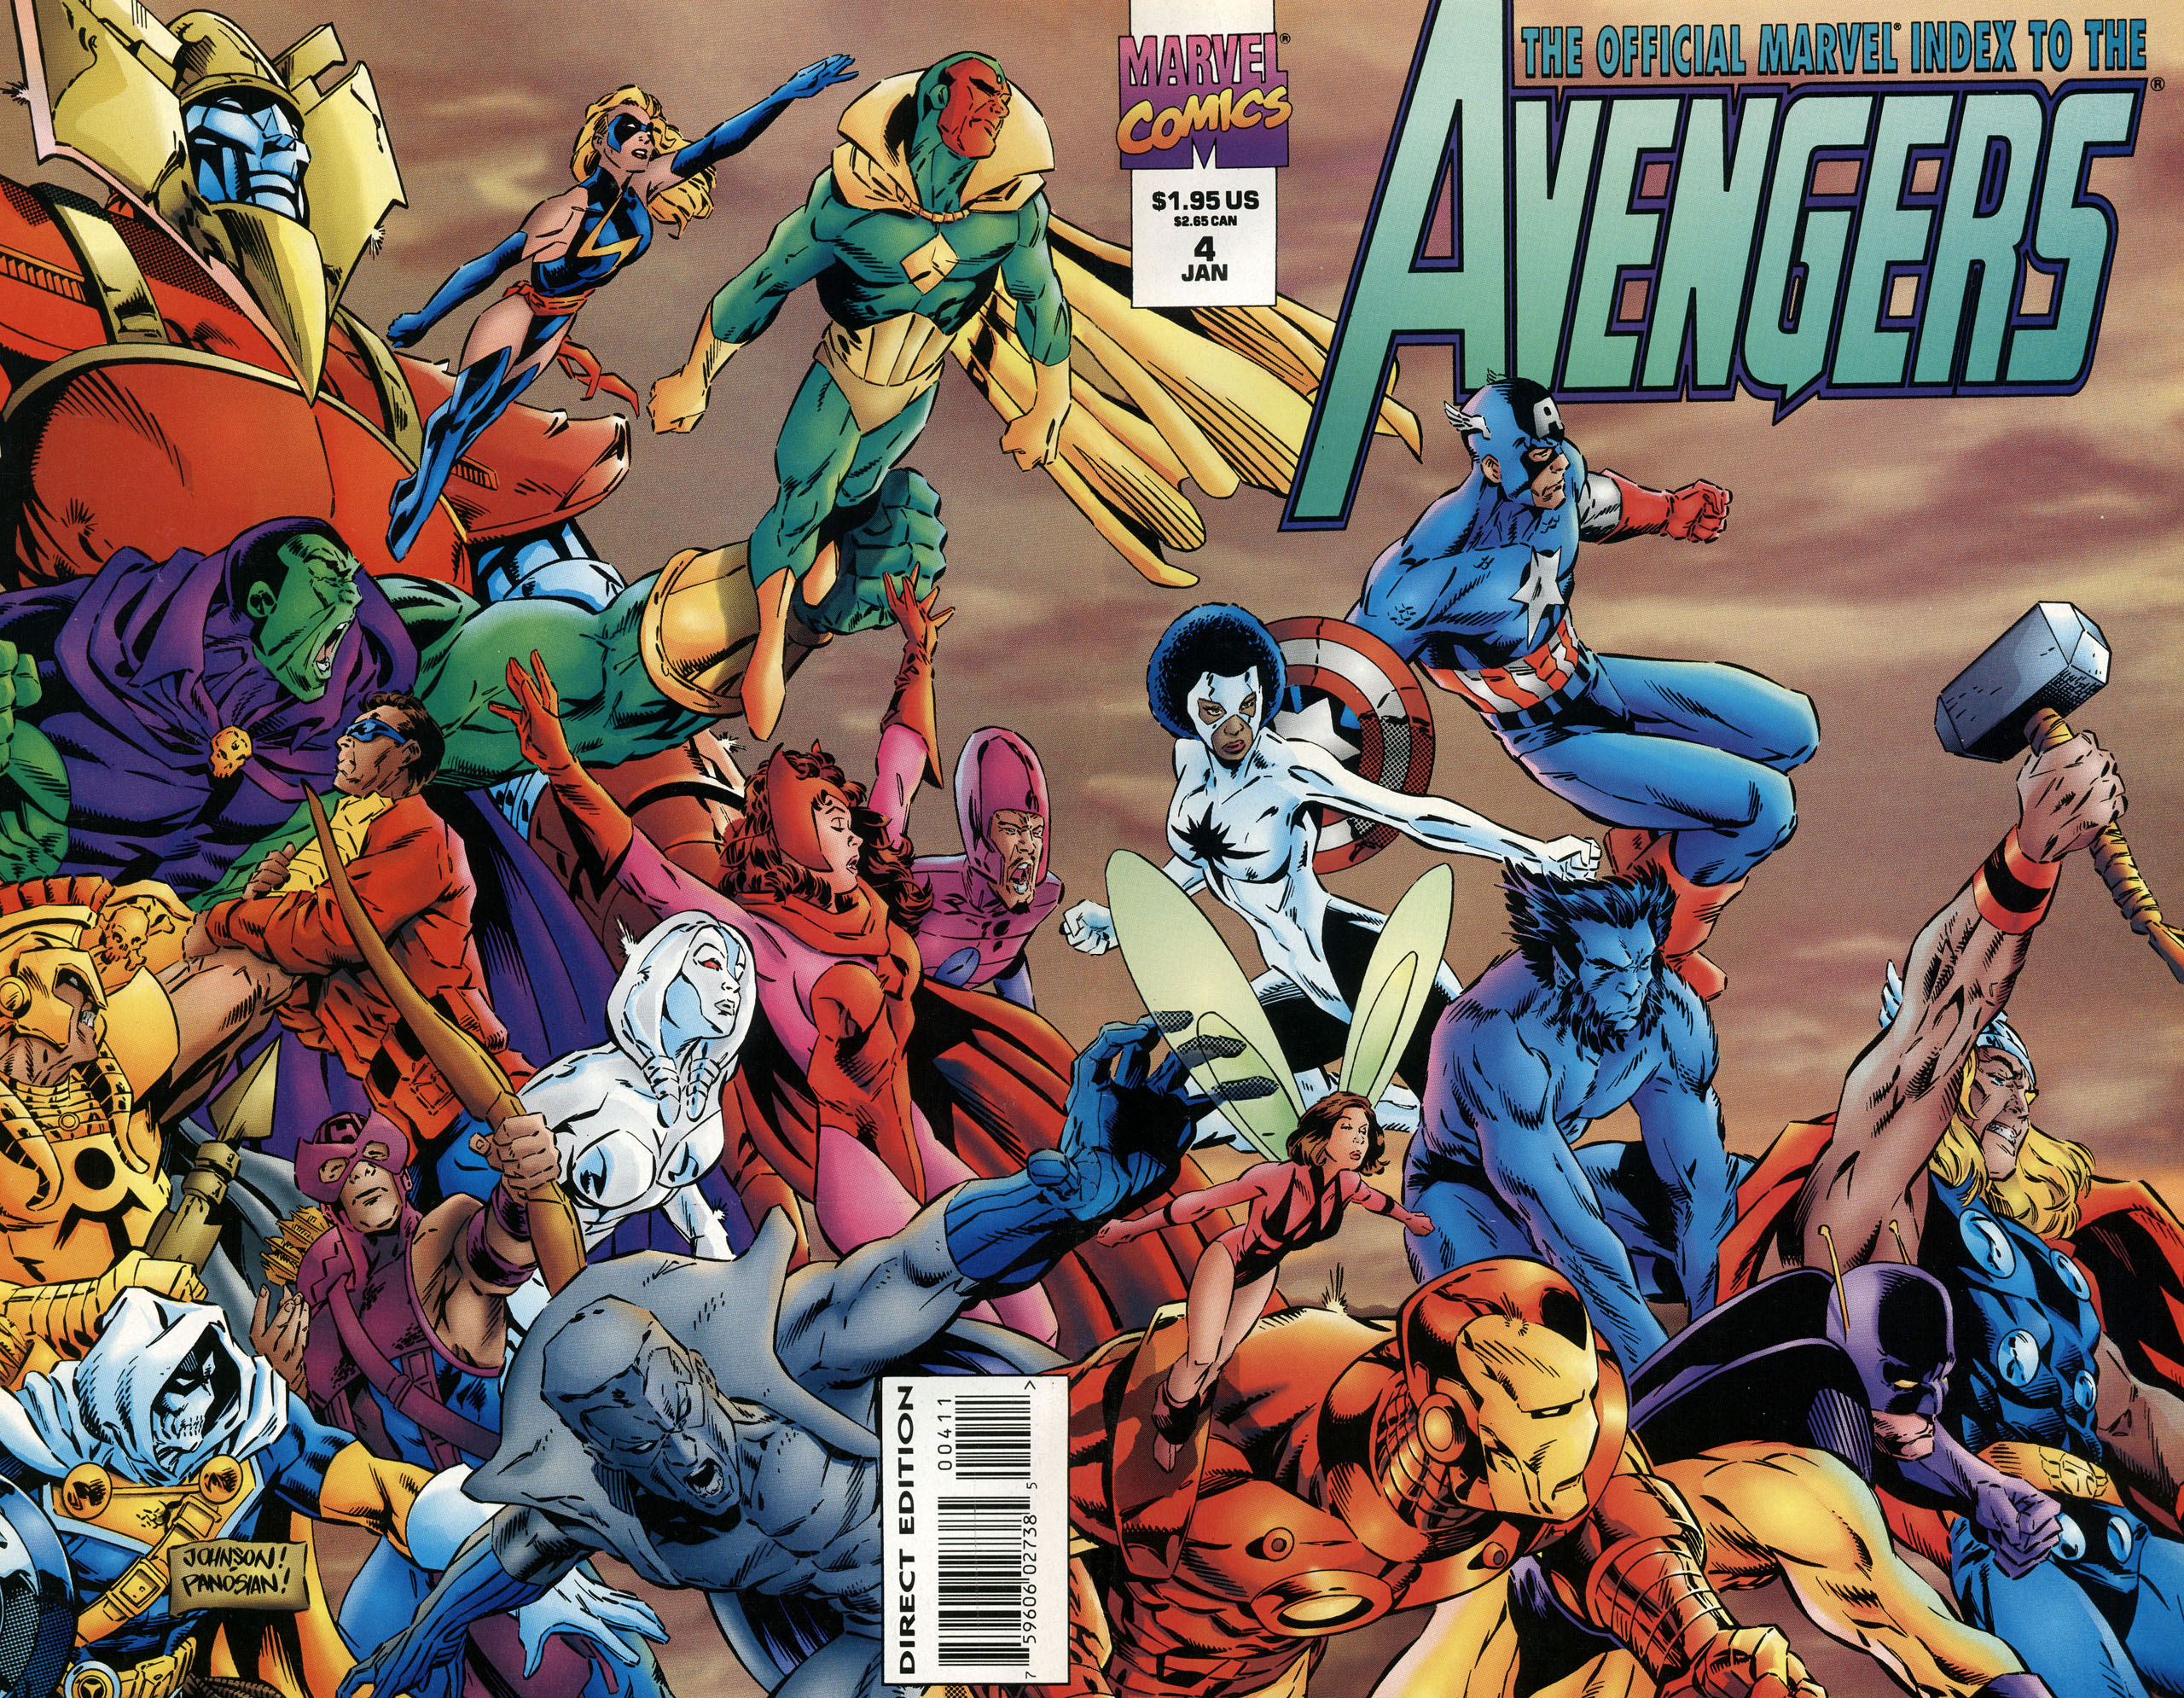 Read online The Official Marvel Index to the Avengers comic -  Issue #4 - 1